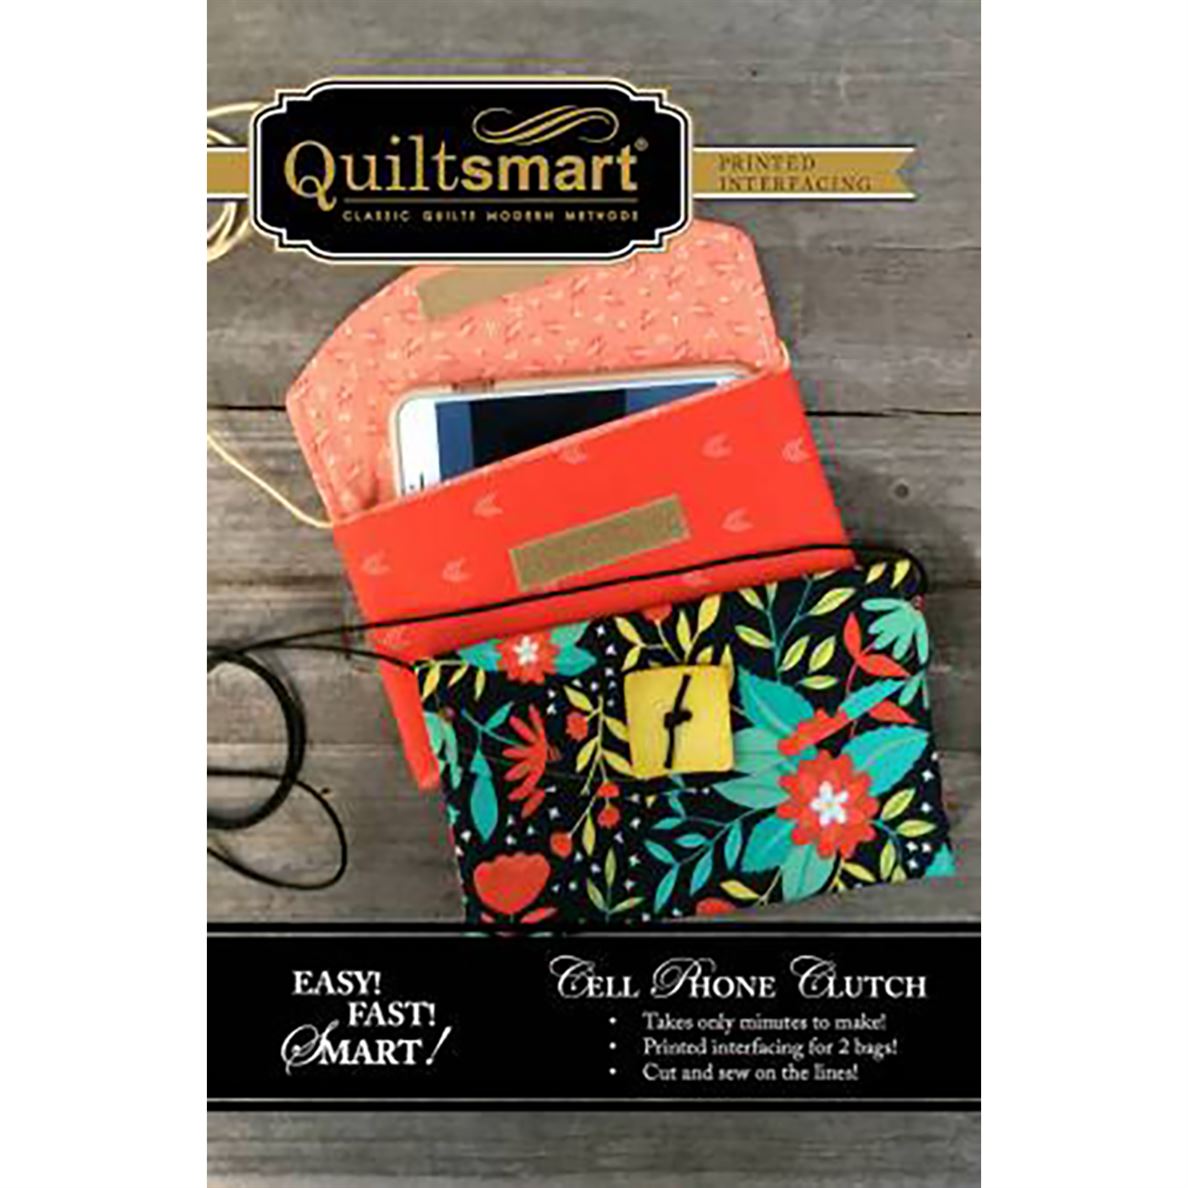 Quiltsmart Cell Phone Clutch